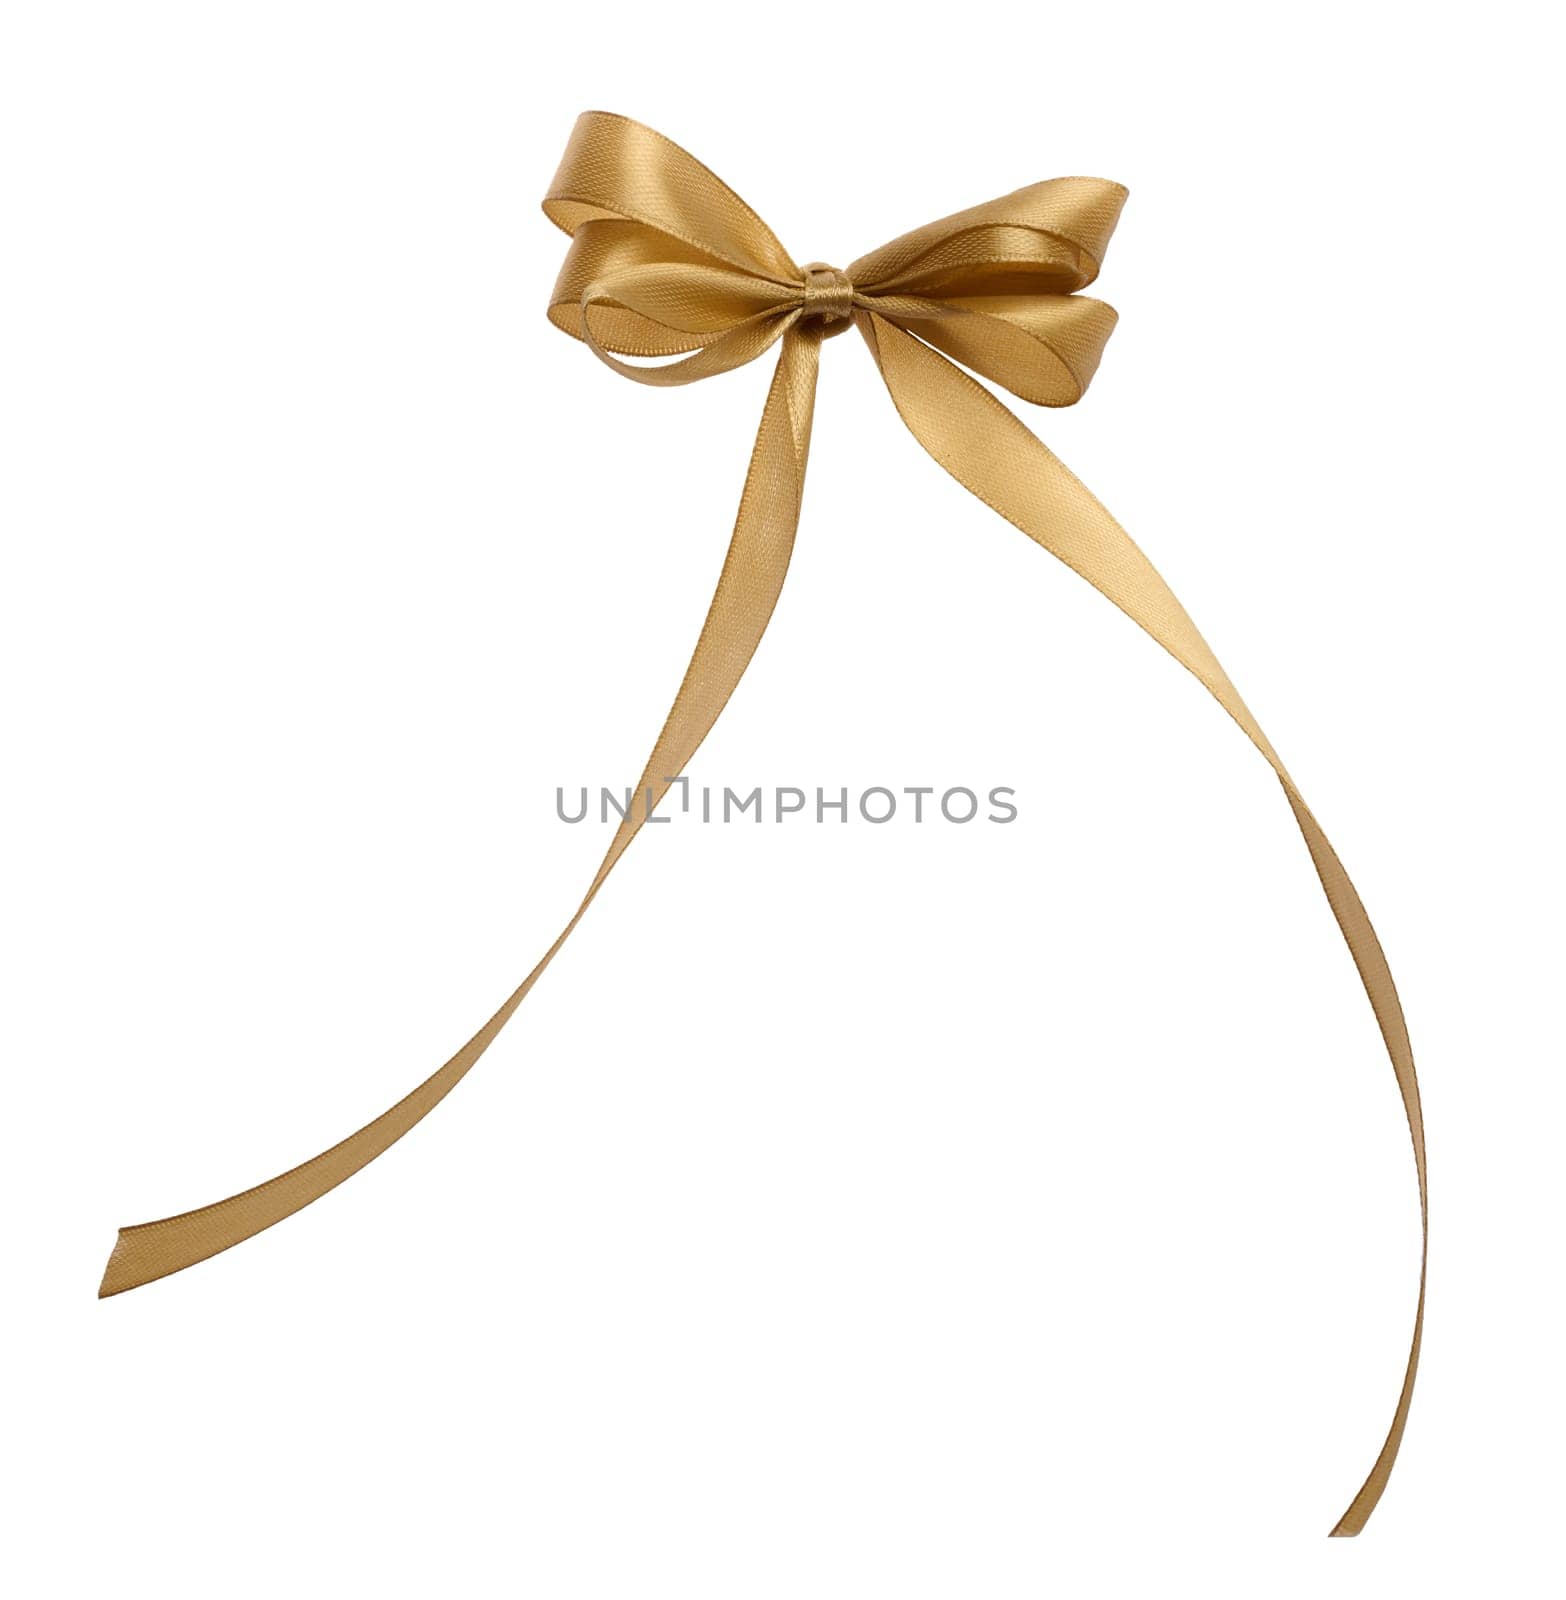 Tied bow made of golden silk ribbon on an isolated background, decor for a gift by ndanko